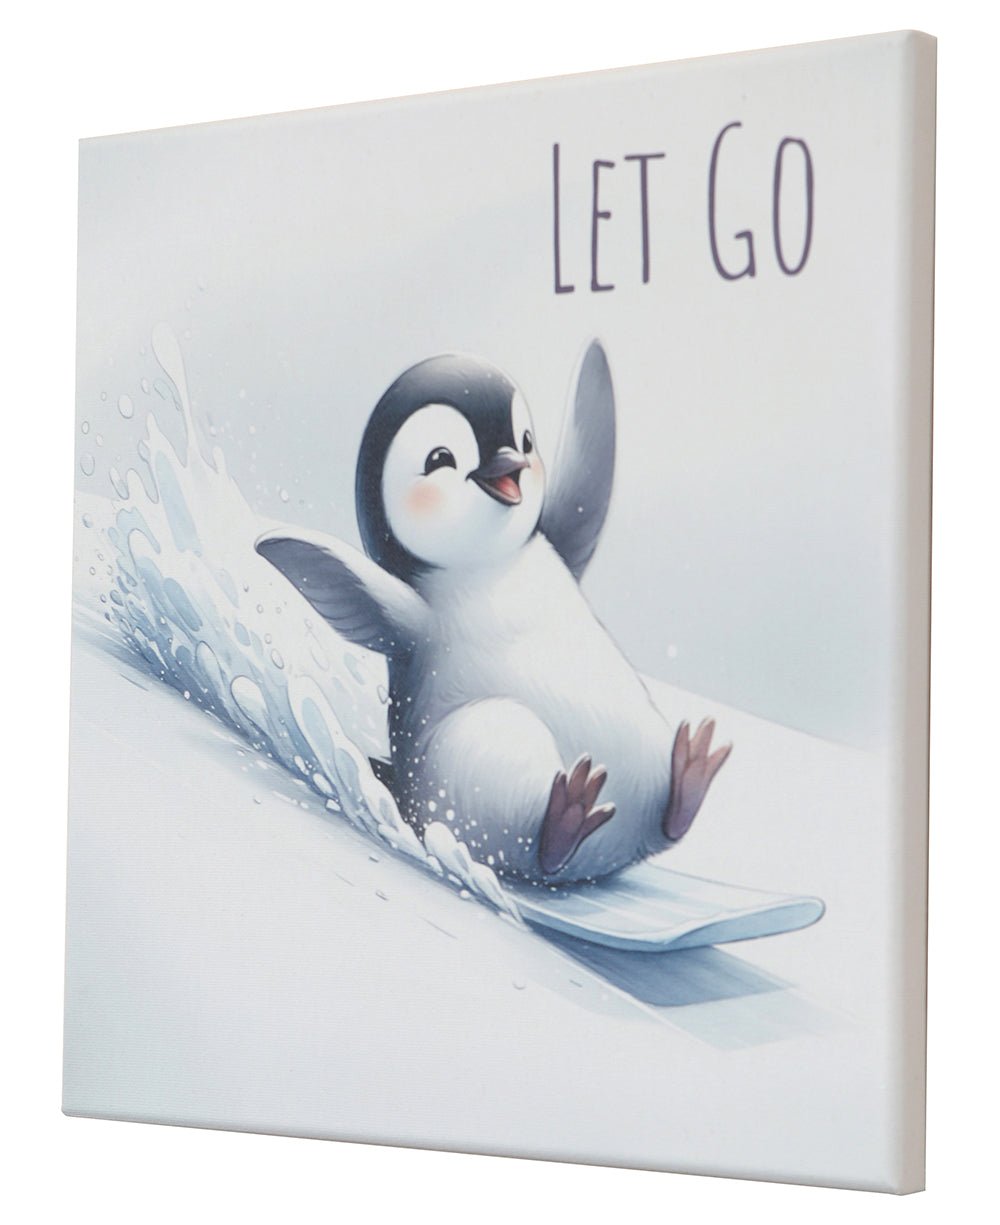 Let Go Happy Penguin Inspirational Canvas Print Wall Hanging - Posters, Prints, & Visual Artwork